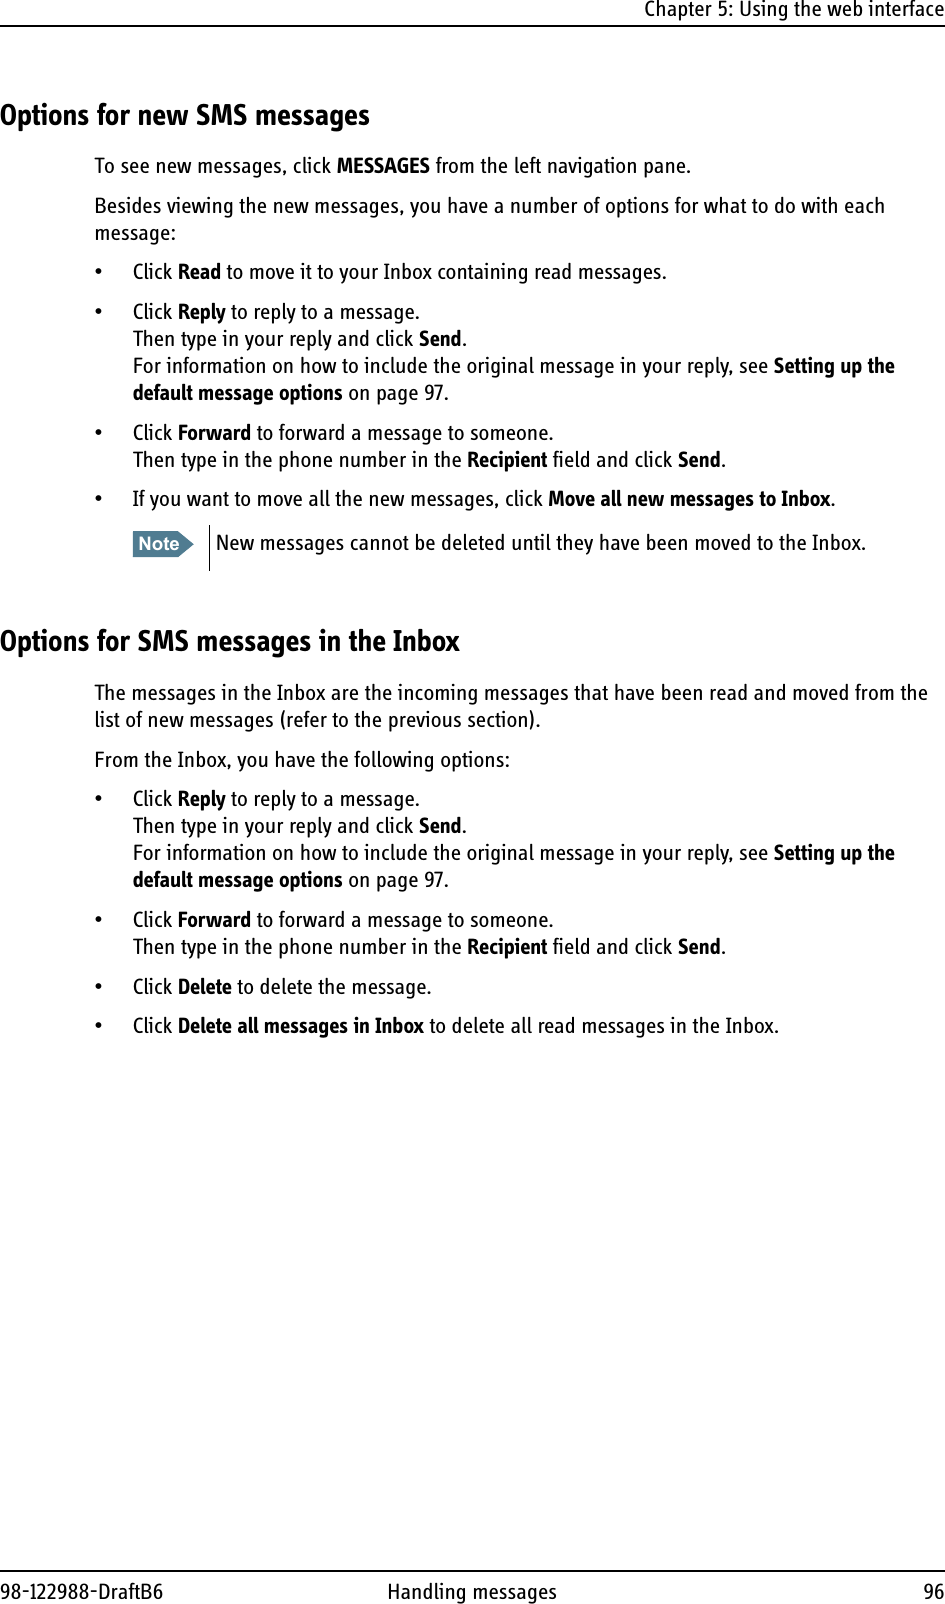 Chapter 5: Using the web interface98-122988-DraftB6 Handling messages 96Options for new SMS messagesTo see new messages, click MESSAGES from the left navigation pane. Besides viewing the new messages, you have a number of options for what to do with each message:• Click Read to move it to your Inbox containing read messages.• Click Reply to reply to a message. Then type in your reply and click Send.For information on how to include the original message in your reply, see Setting up the default message options on page 97.• Click Forward to forward a message to someone. Then type in the phone number in the Recipient field and click Send.• If you want to move all the new messages, click Move all new messages to Inbox.Options for SMS messages in the InboxThe messages in the Inbox are the incoming messages that have been read and moved from the list of new messages (refer to the previous section).From the Inbox, you have the following options:• Click Reply to reply to a message. Then type in your reply and click Send.For information on how to include the original message in your reply, see Setting up the default message options on page 97.• Click Forward to forward a message to someone. Then type in the phone number in the Recipient field and click Send.• Click Delete to delete the message. • Click Delete all messages in Inbox to delete all read messages in the Inbox. Note New messages cannot be deleted until they have been moved to the Inbox.